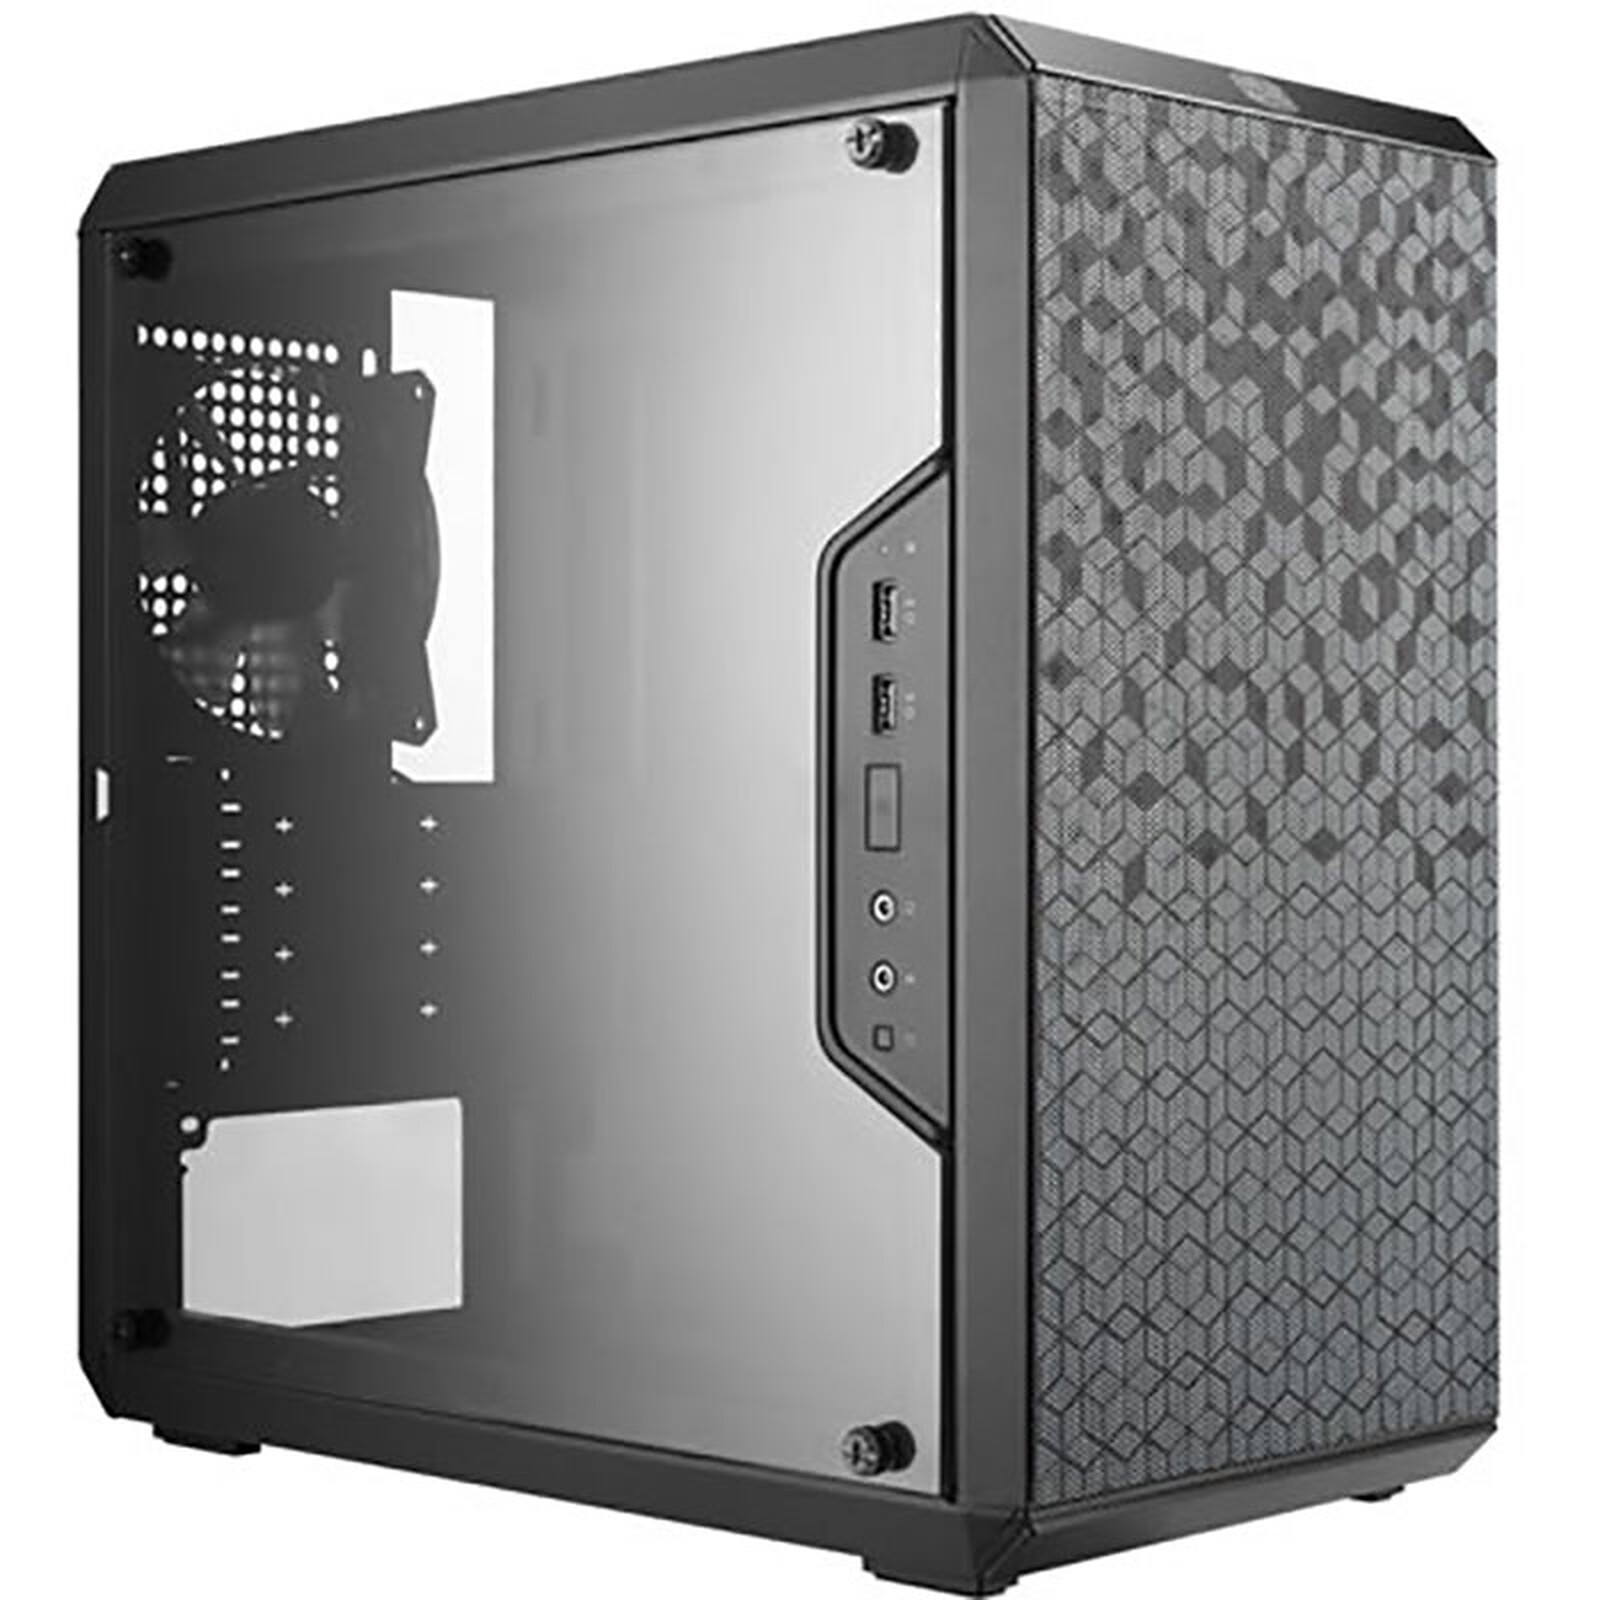 Cooler Master MasterBox Q300L - PC cases - LDLC 3-year warranty